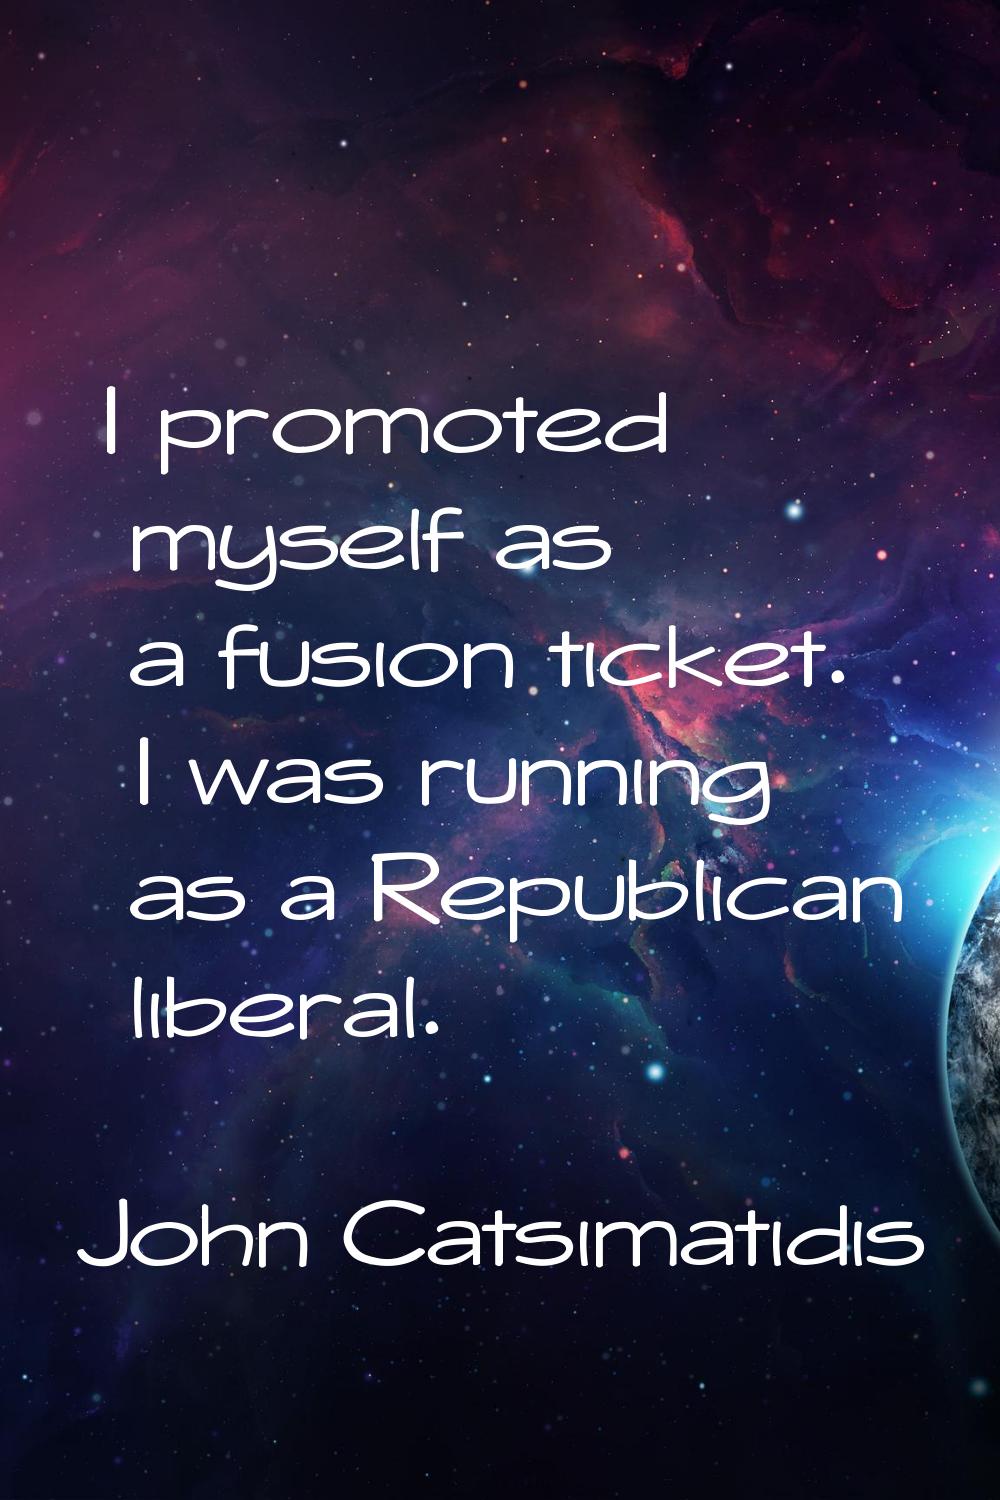 I promoted myself as a fusion ticket. I was running as a Republican liberal.